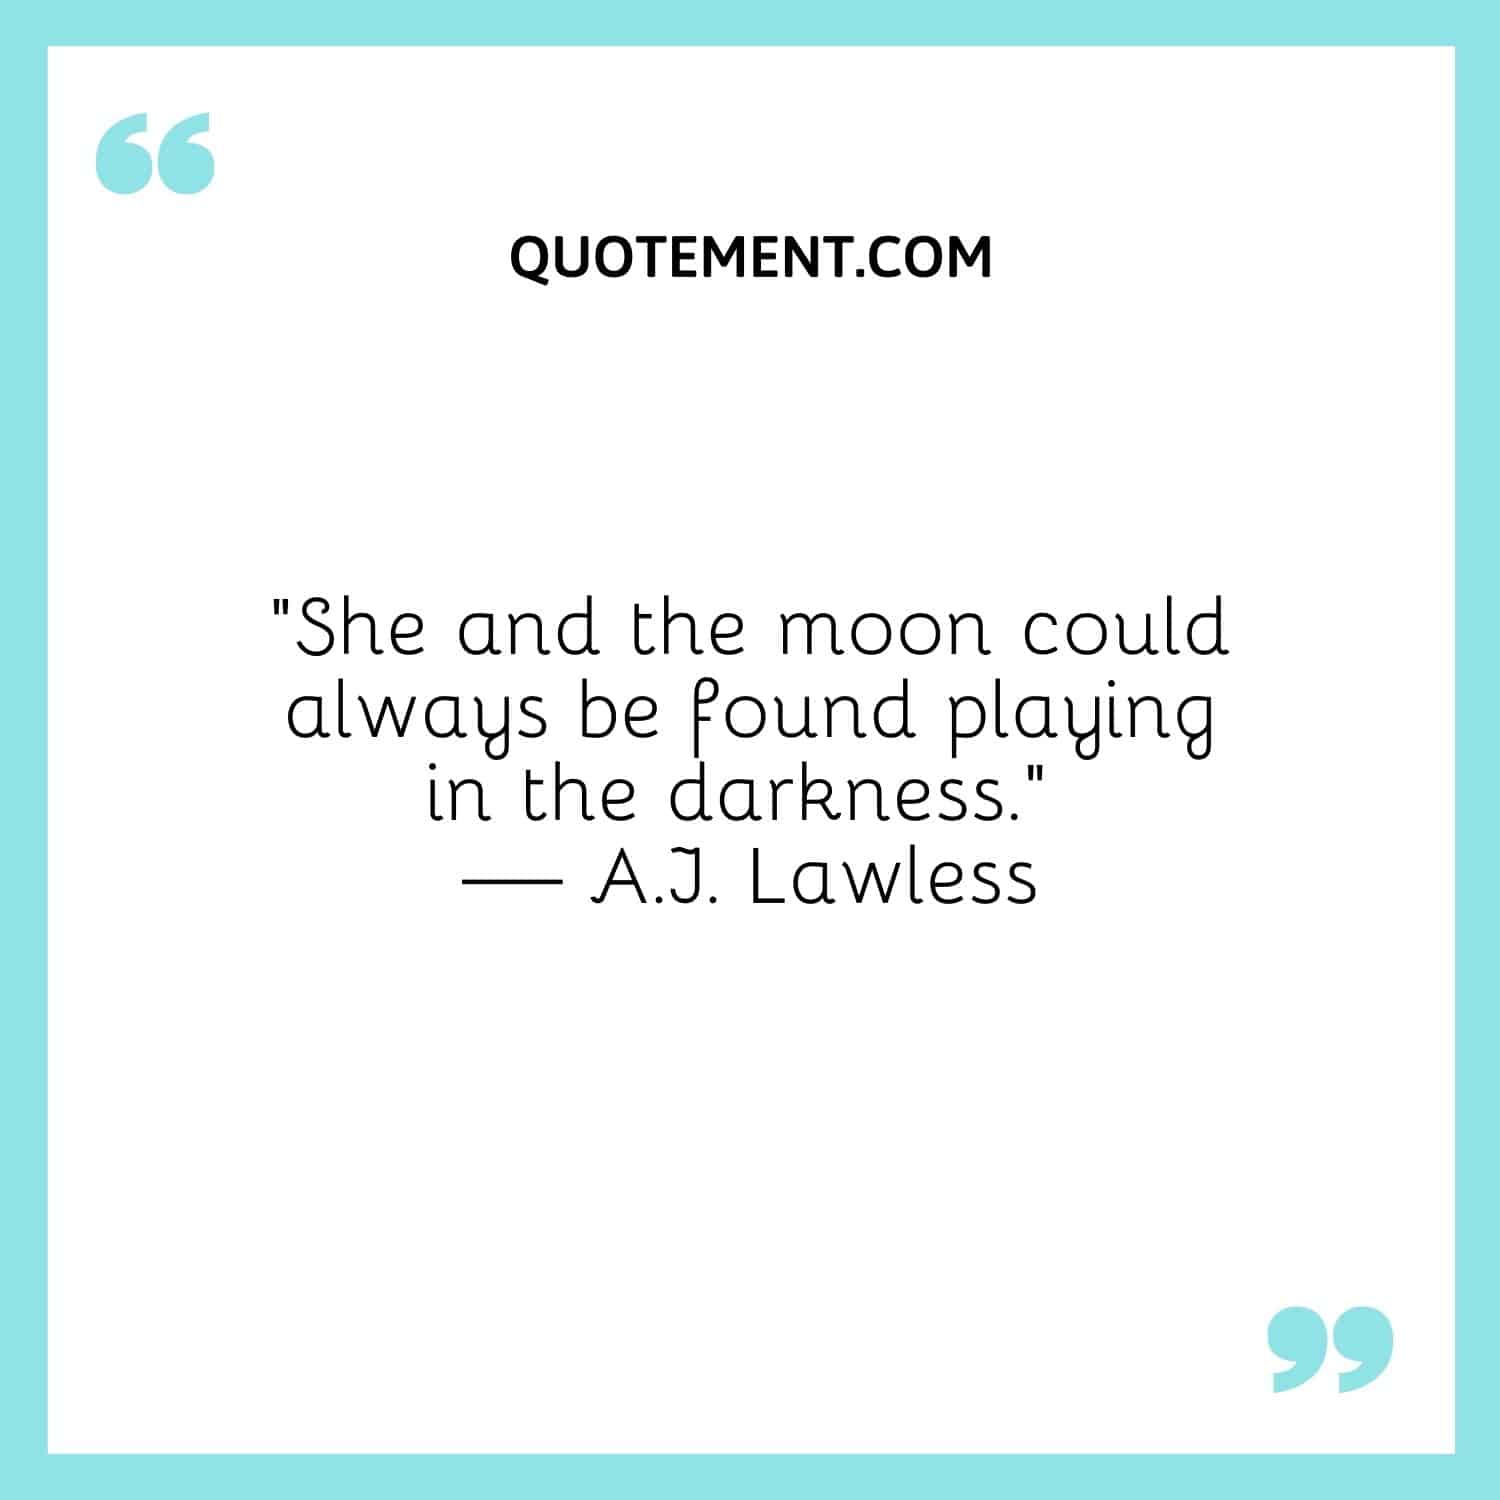 “She and the moon could always be found playing in the darkness.” — A.J. Lawless